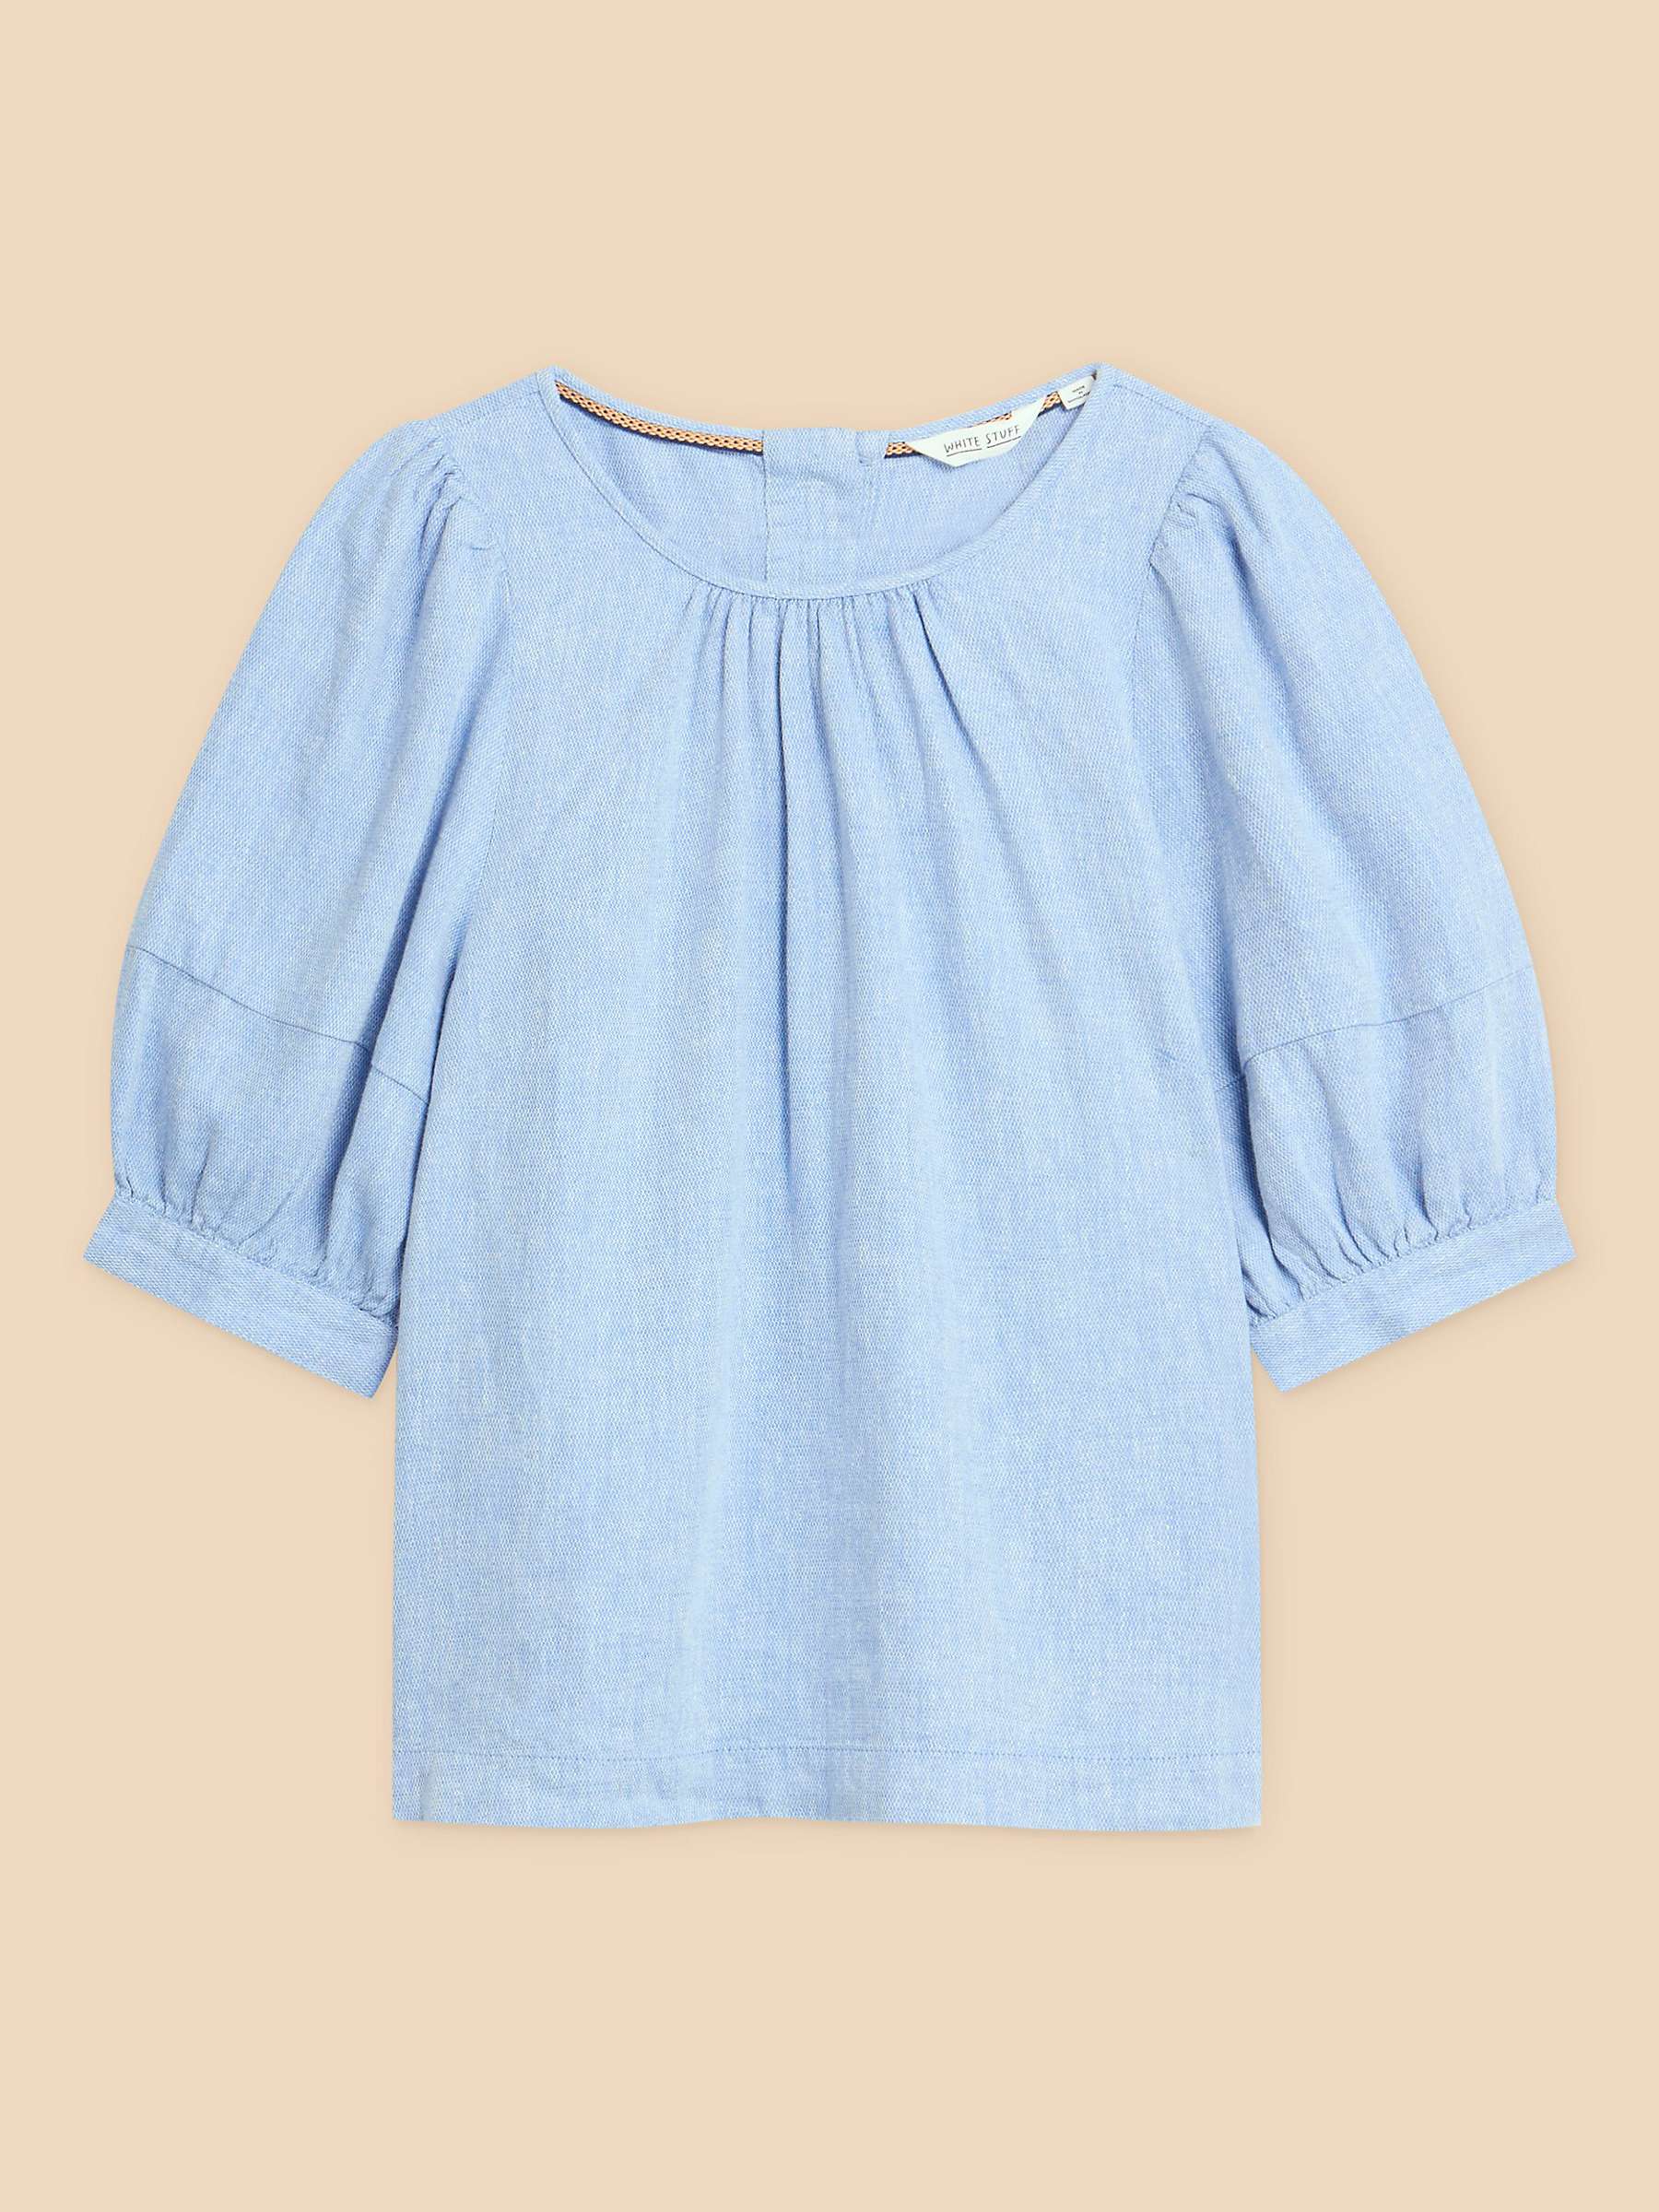 Buy White Stuff Shelly Linen Blend Top, Chambray Blue Online at johnlewis.com